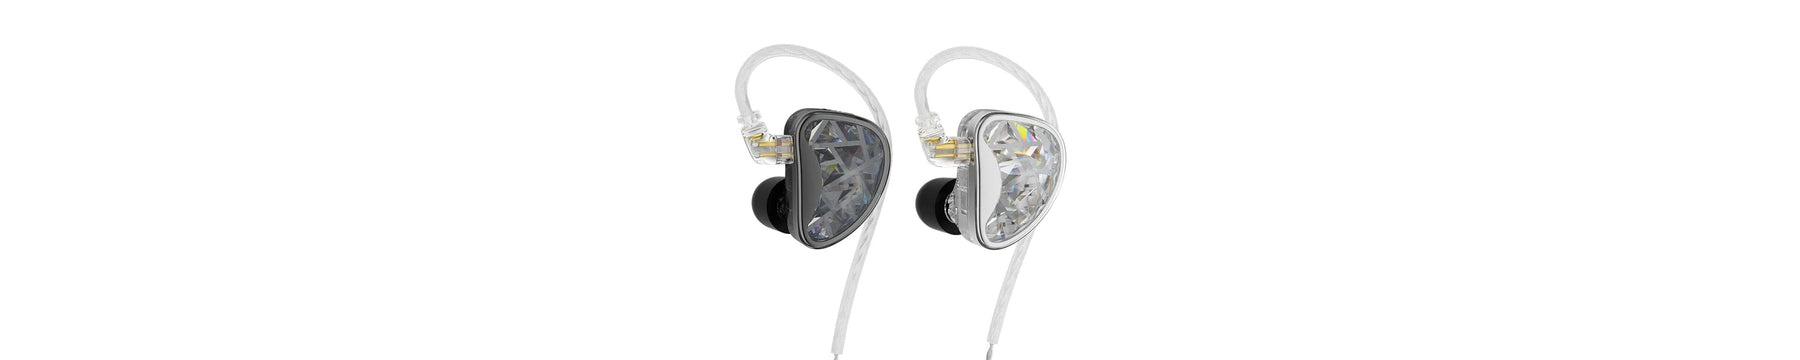 KZ AS24 Flagship 12 BA Driver IEMs With 8 Tuning Switches